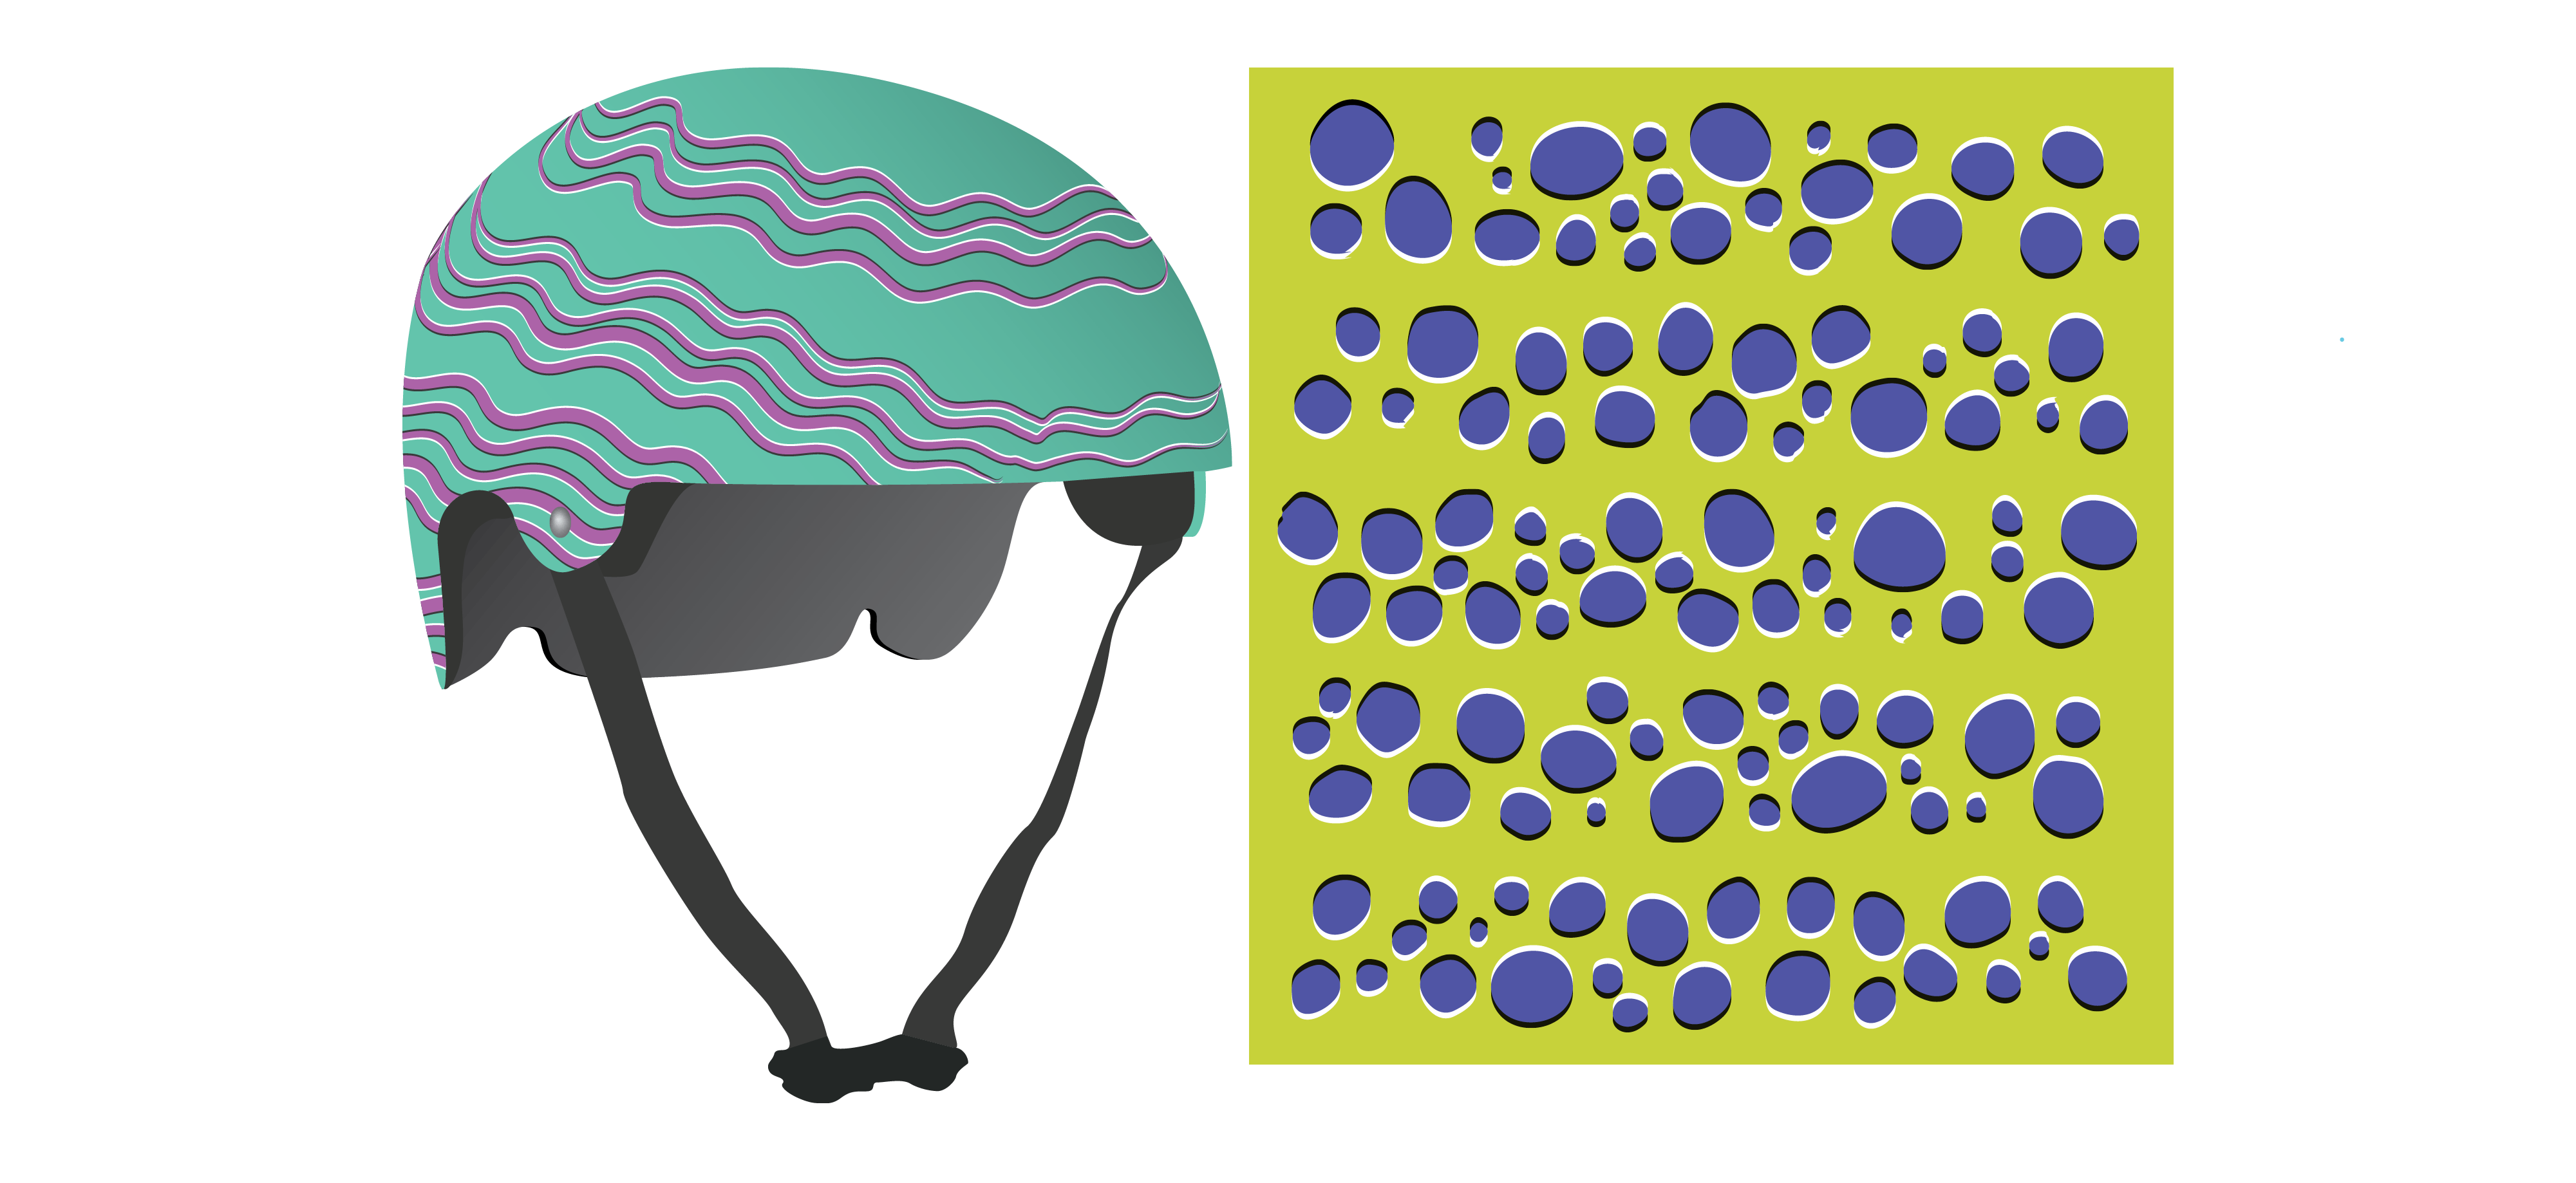 On the left is a turquoise bike helmet with randomly-spaced purple squiggly lines that follow the curved contour of the surface. On the right is a lime green square with blue ovals in different sizes scattered all over its surface.